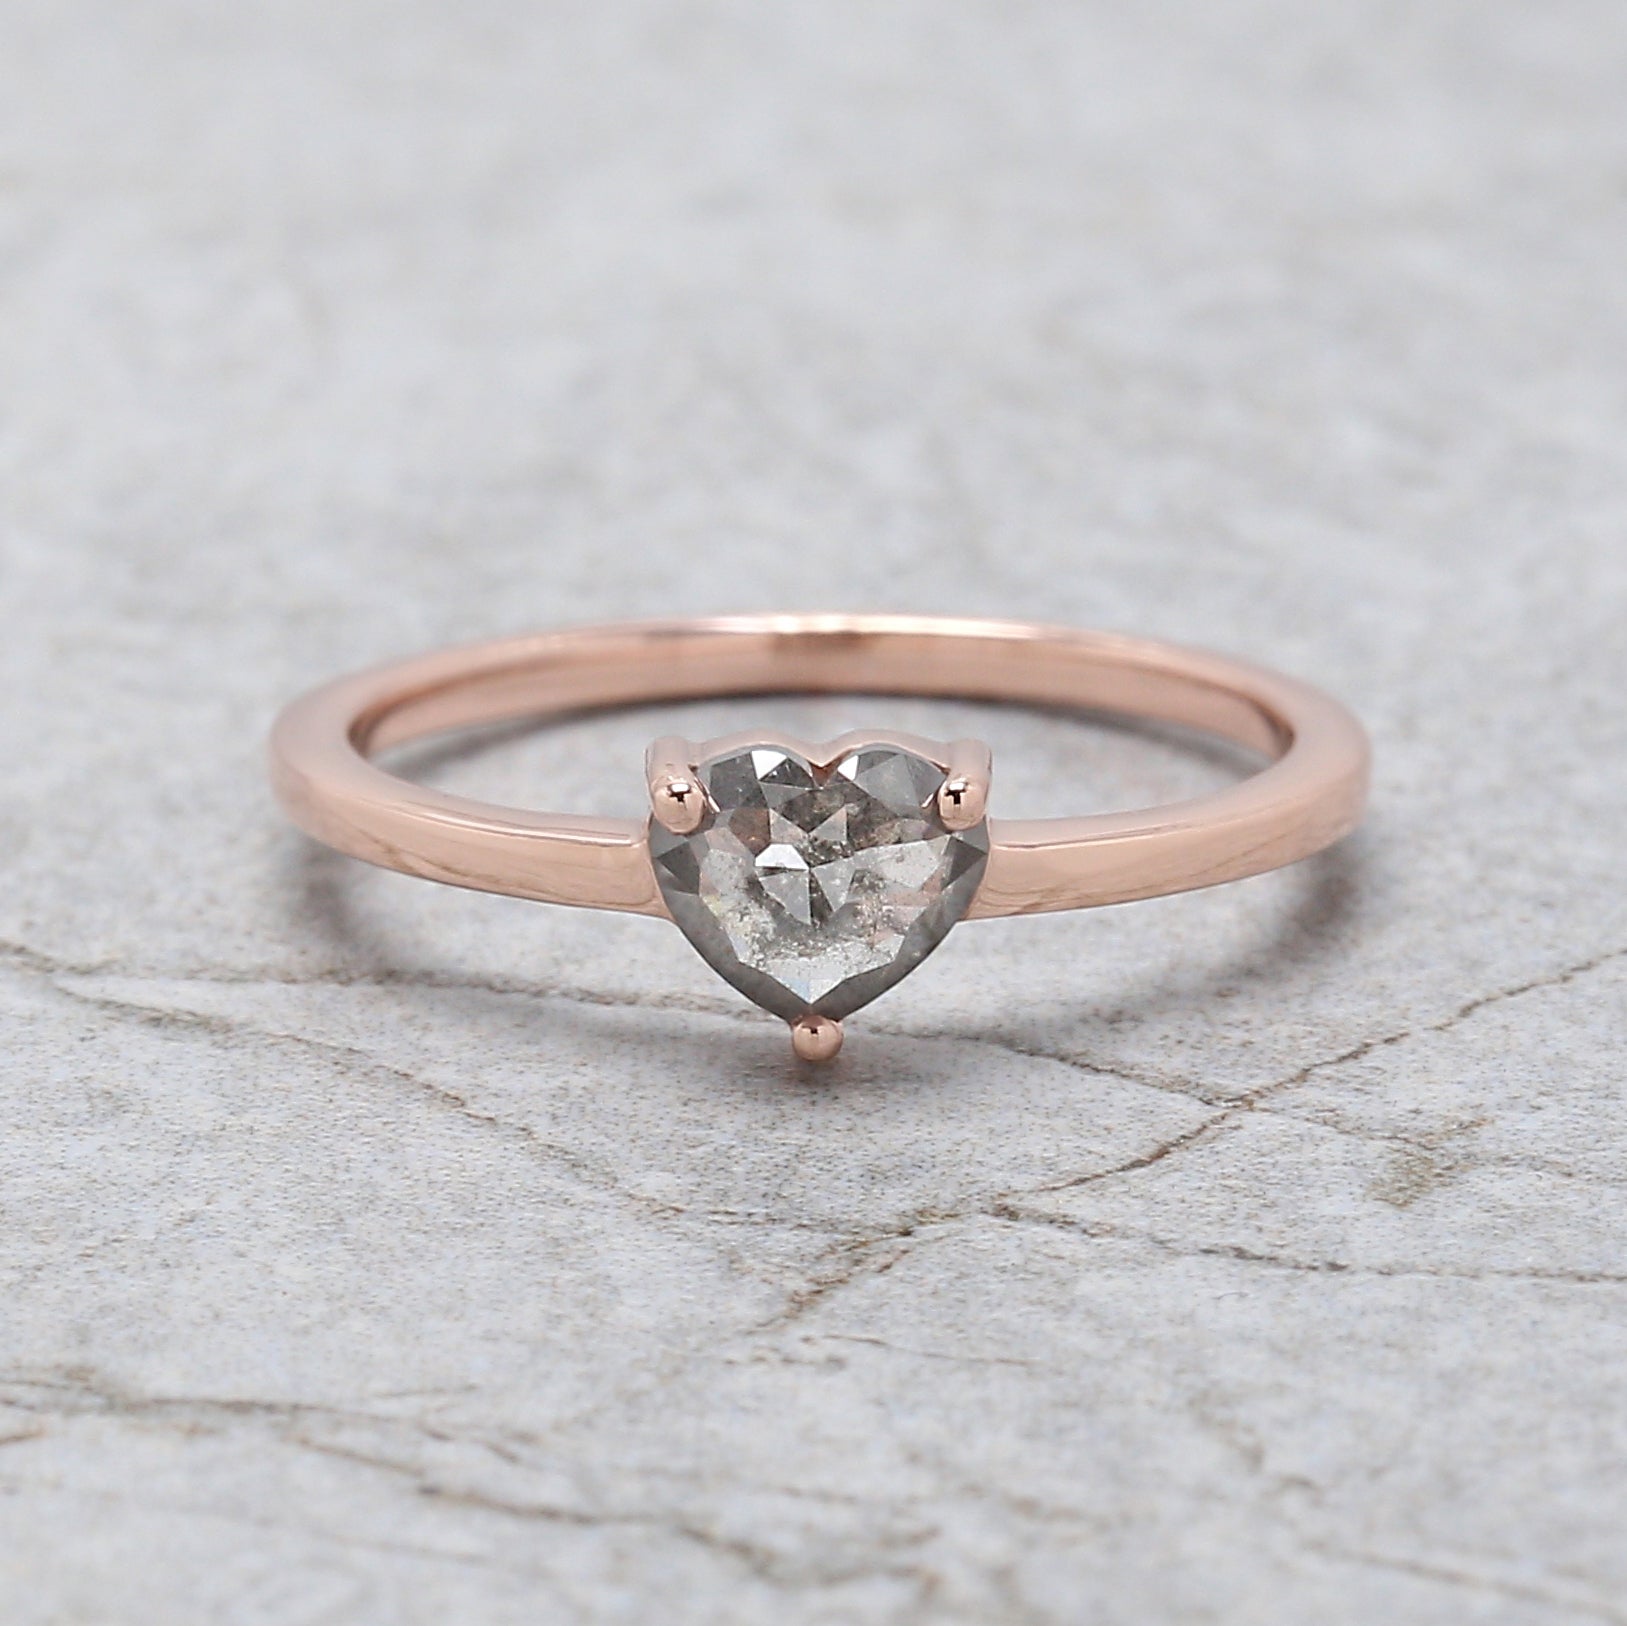 Heart Cut Salt And Pepper Diamond Ring 0.49 Ct 4.85 MM Heart Diamond Ring 14K Solid Rose Gold Silver Engagement Ring Gift For Her QL1633